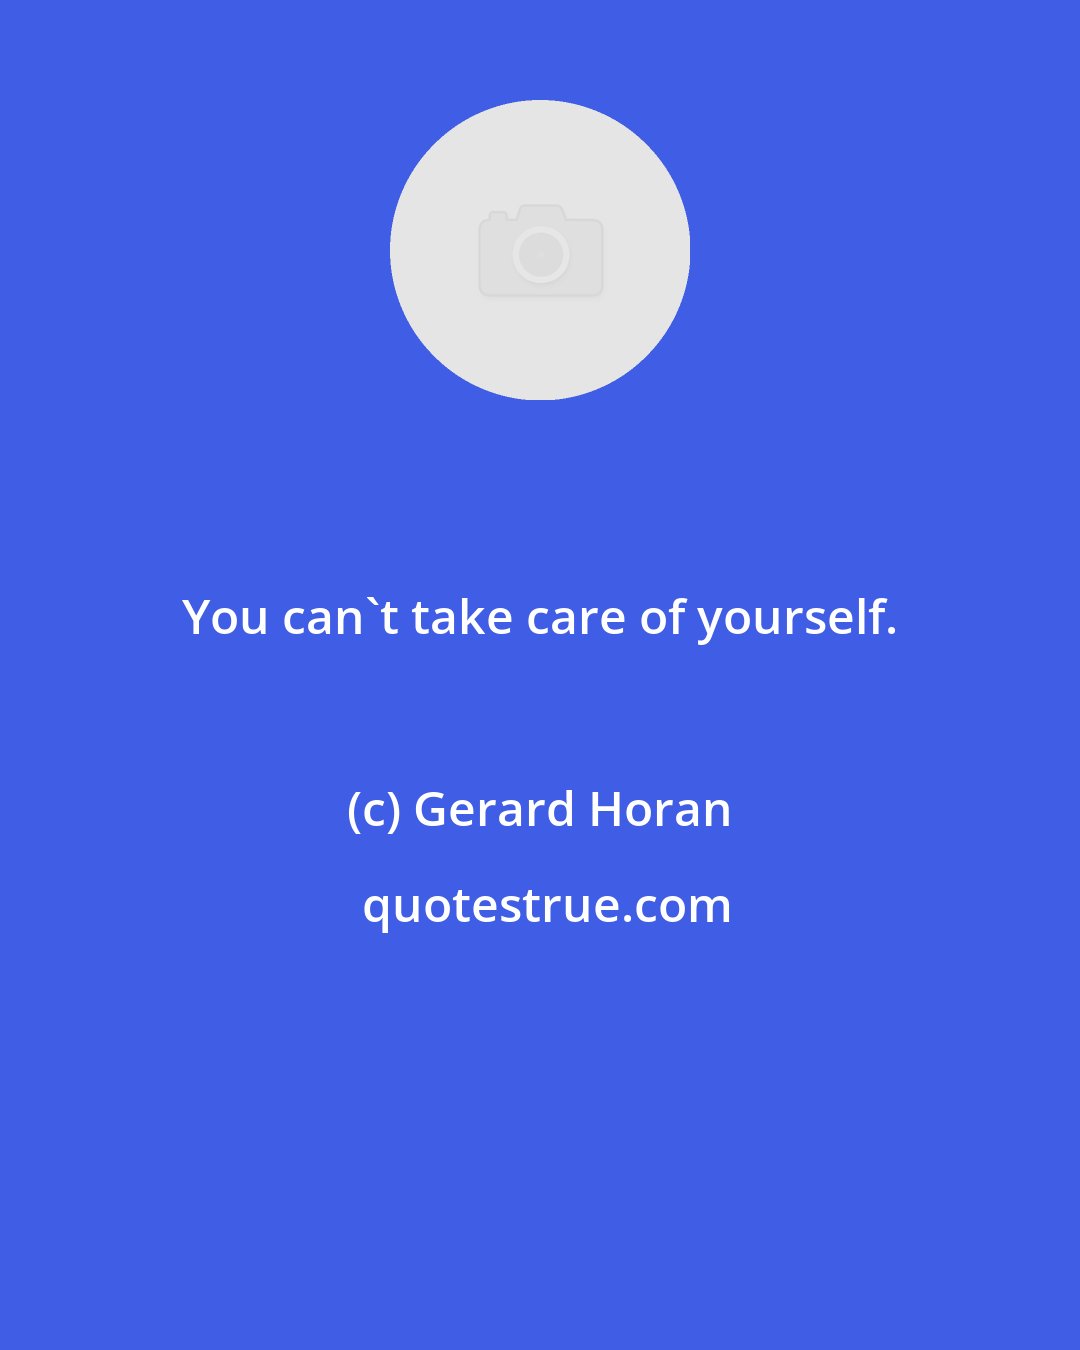 Gerard Horan: You can't take care of yourself.